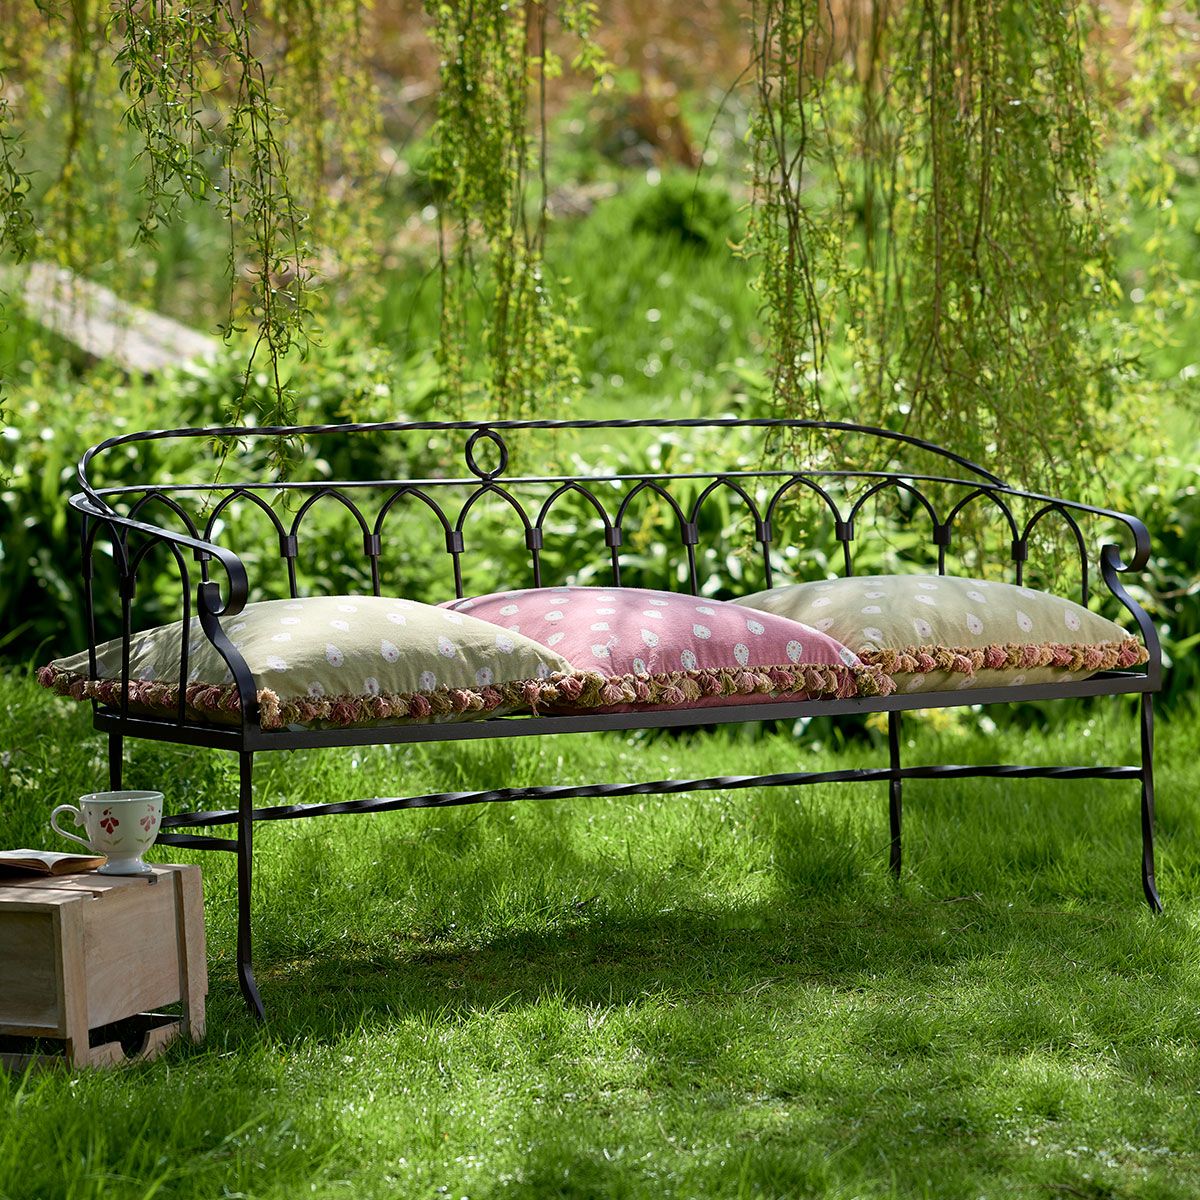 The Charm of a Petite Garden Bench